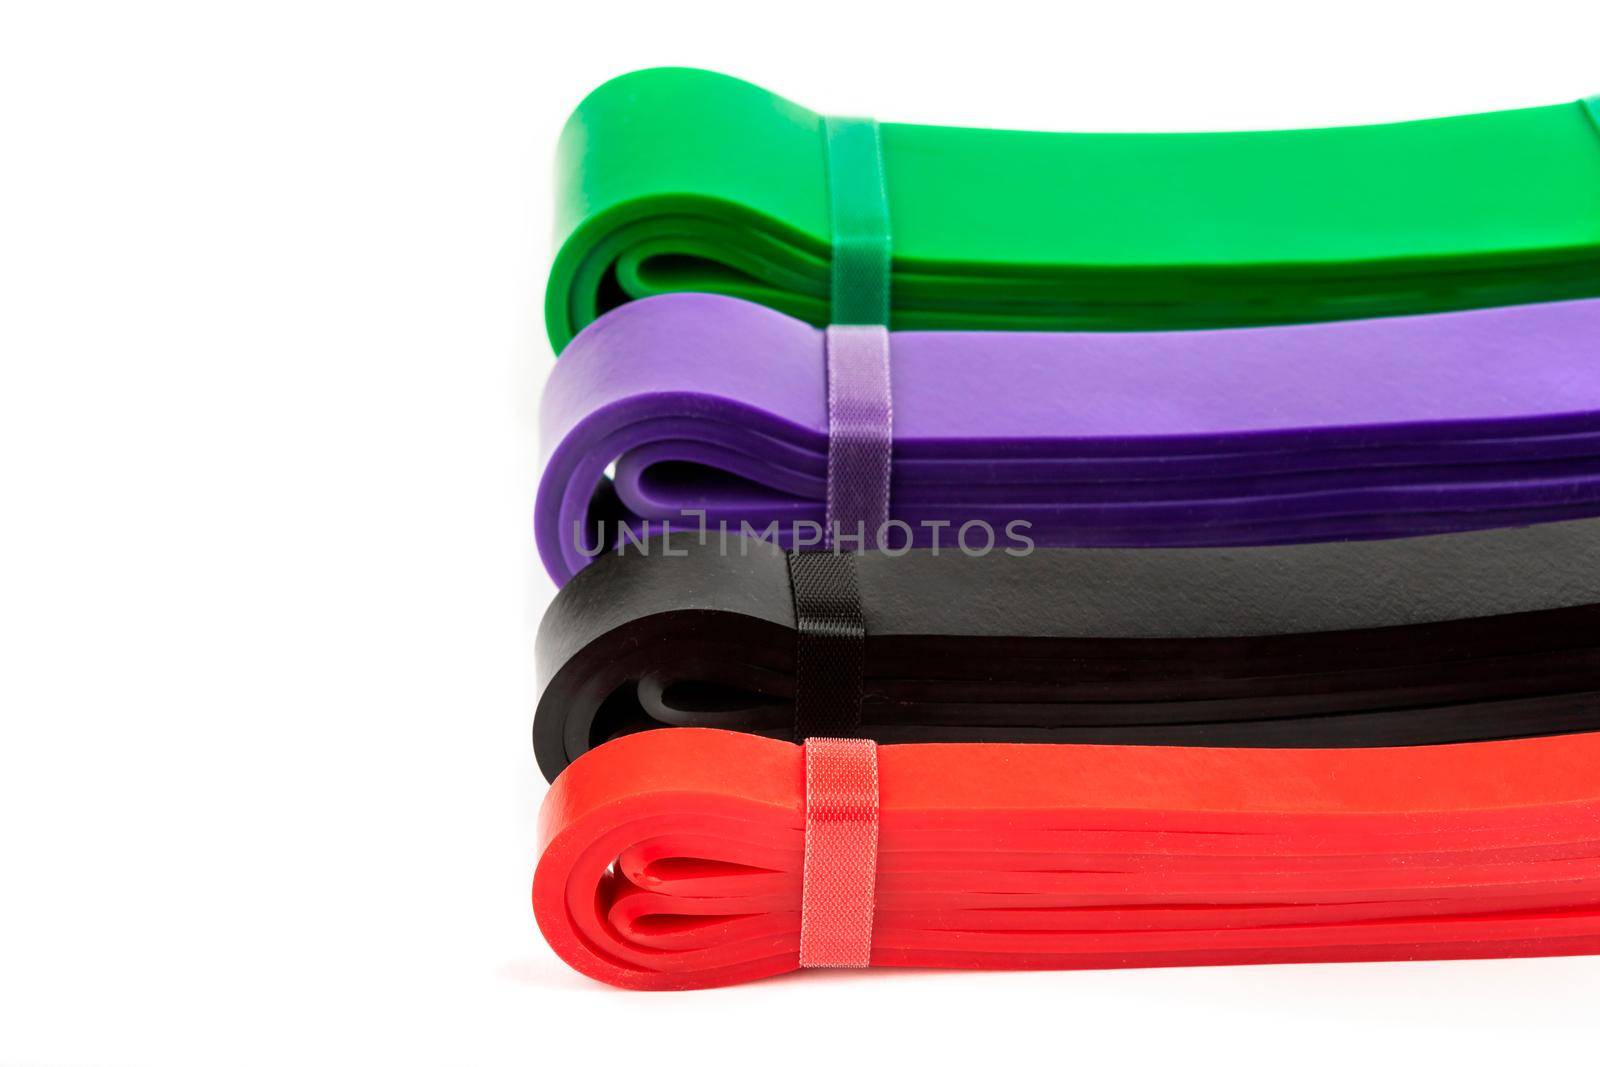 four multi-colored fitness elastic bands of different loads for training on muscle groups by bySergPo